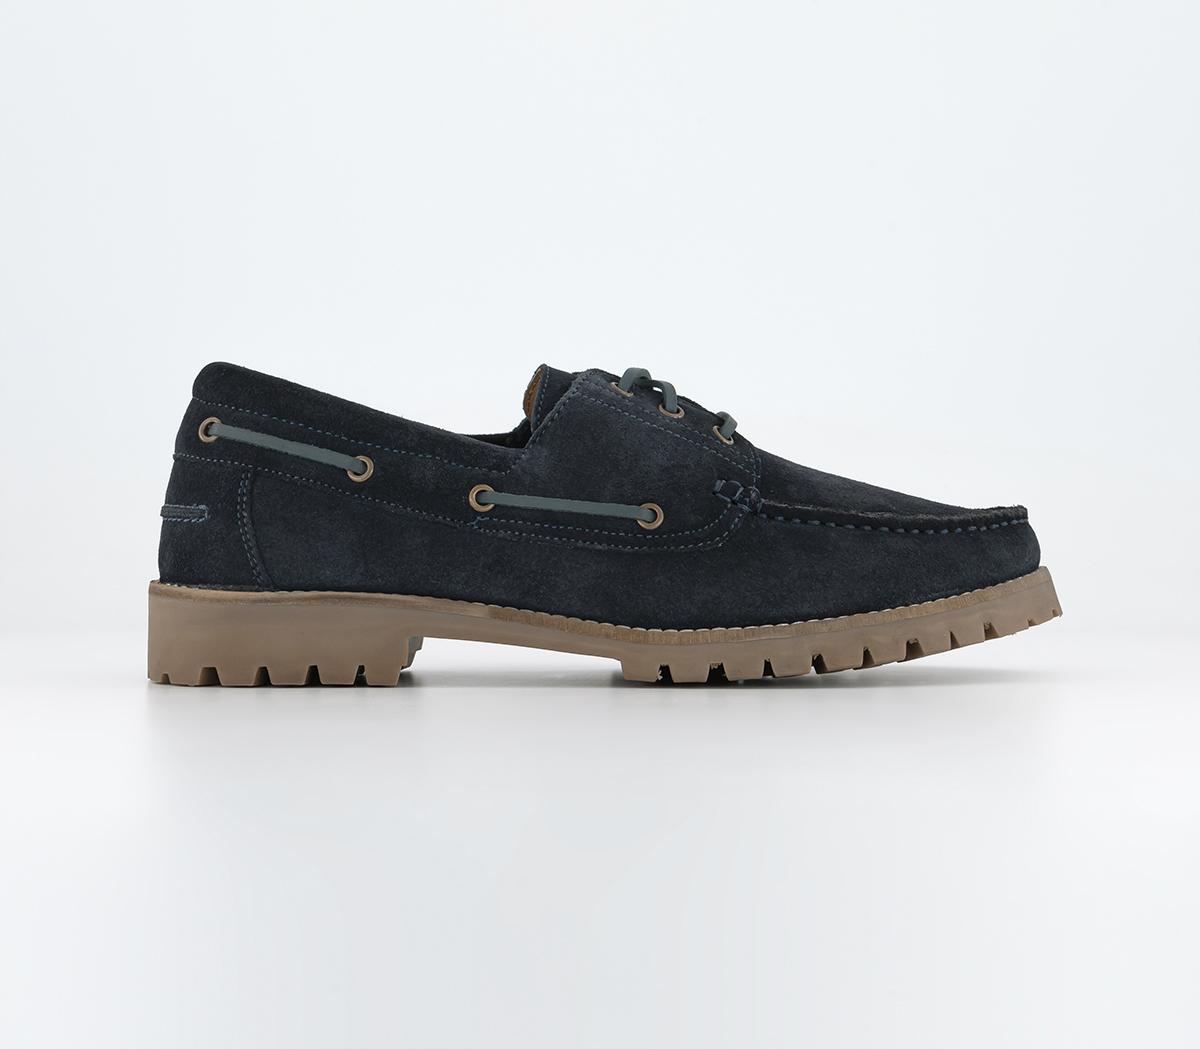 OFFICEColorado Cleated Suede Boat ShoesNavy Suede